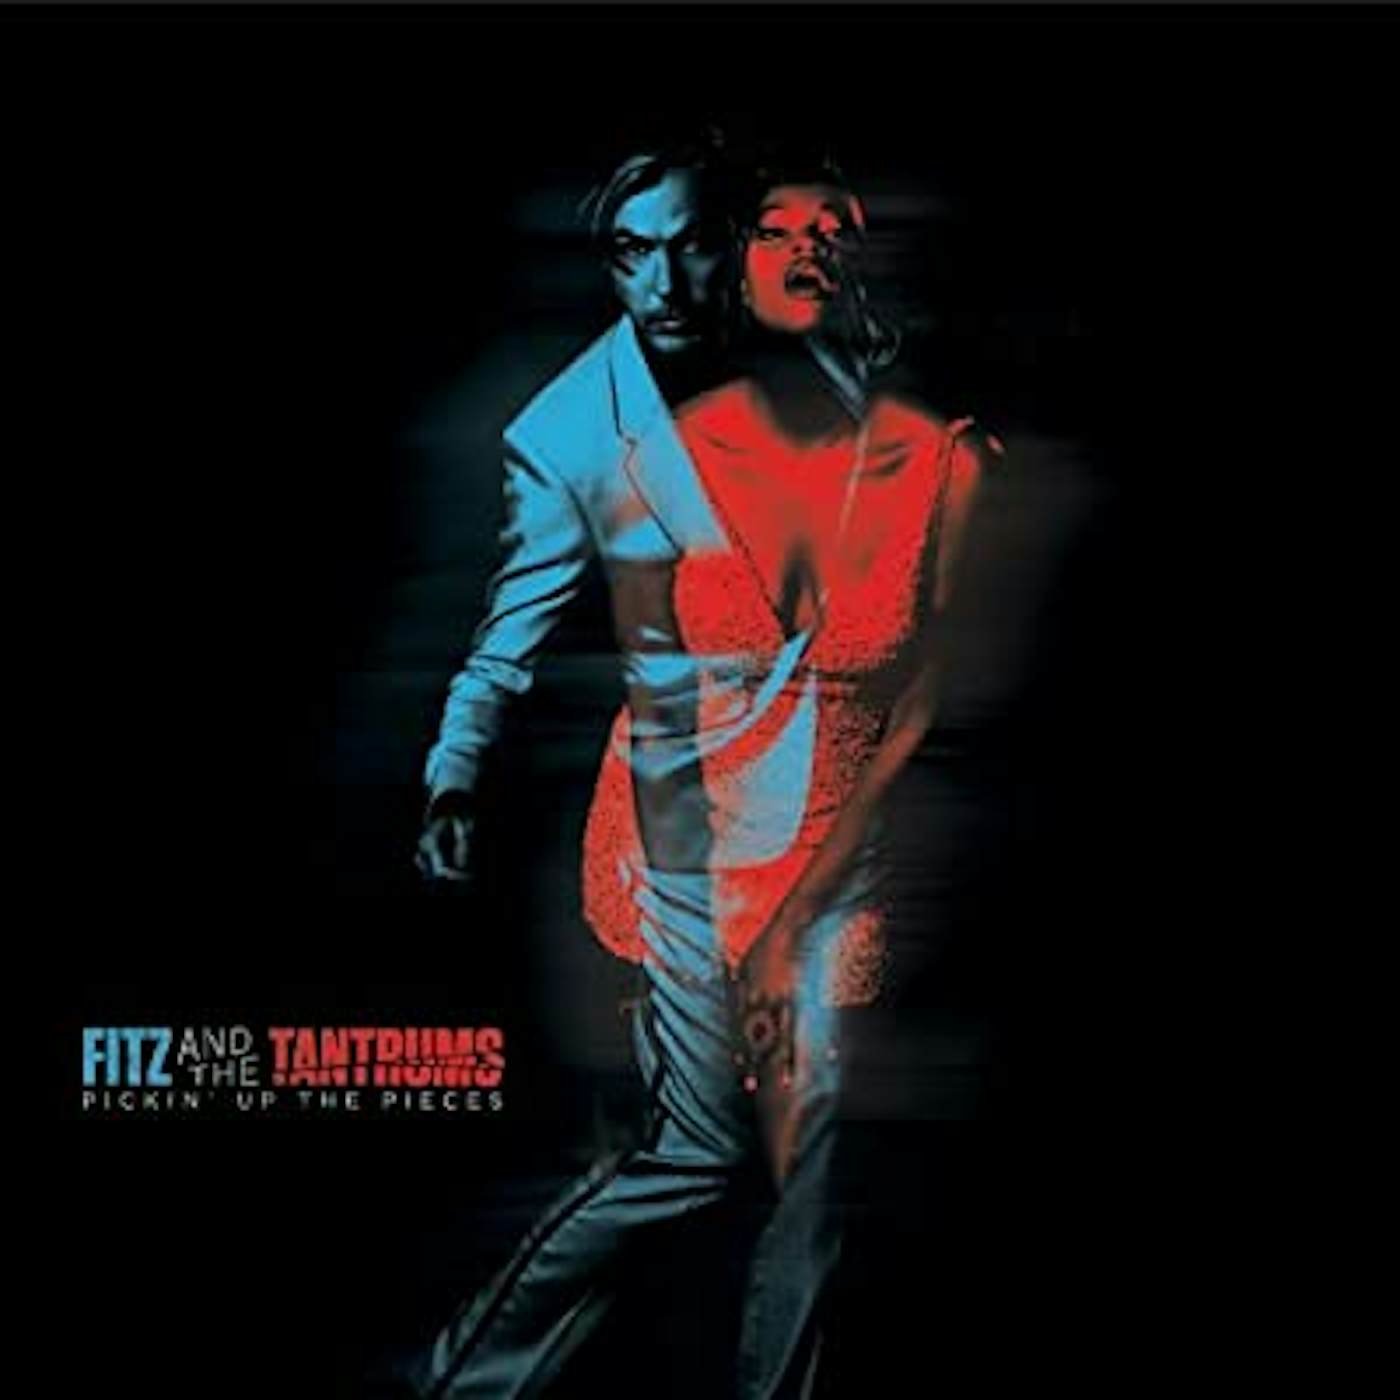 Fitz and The Tantrums Pickin' Up The Pieces Vinyl Record